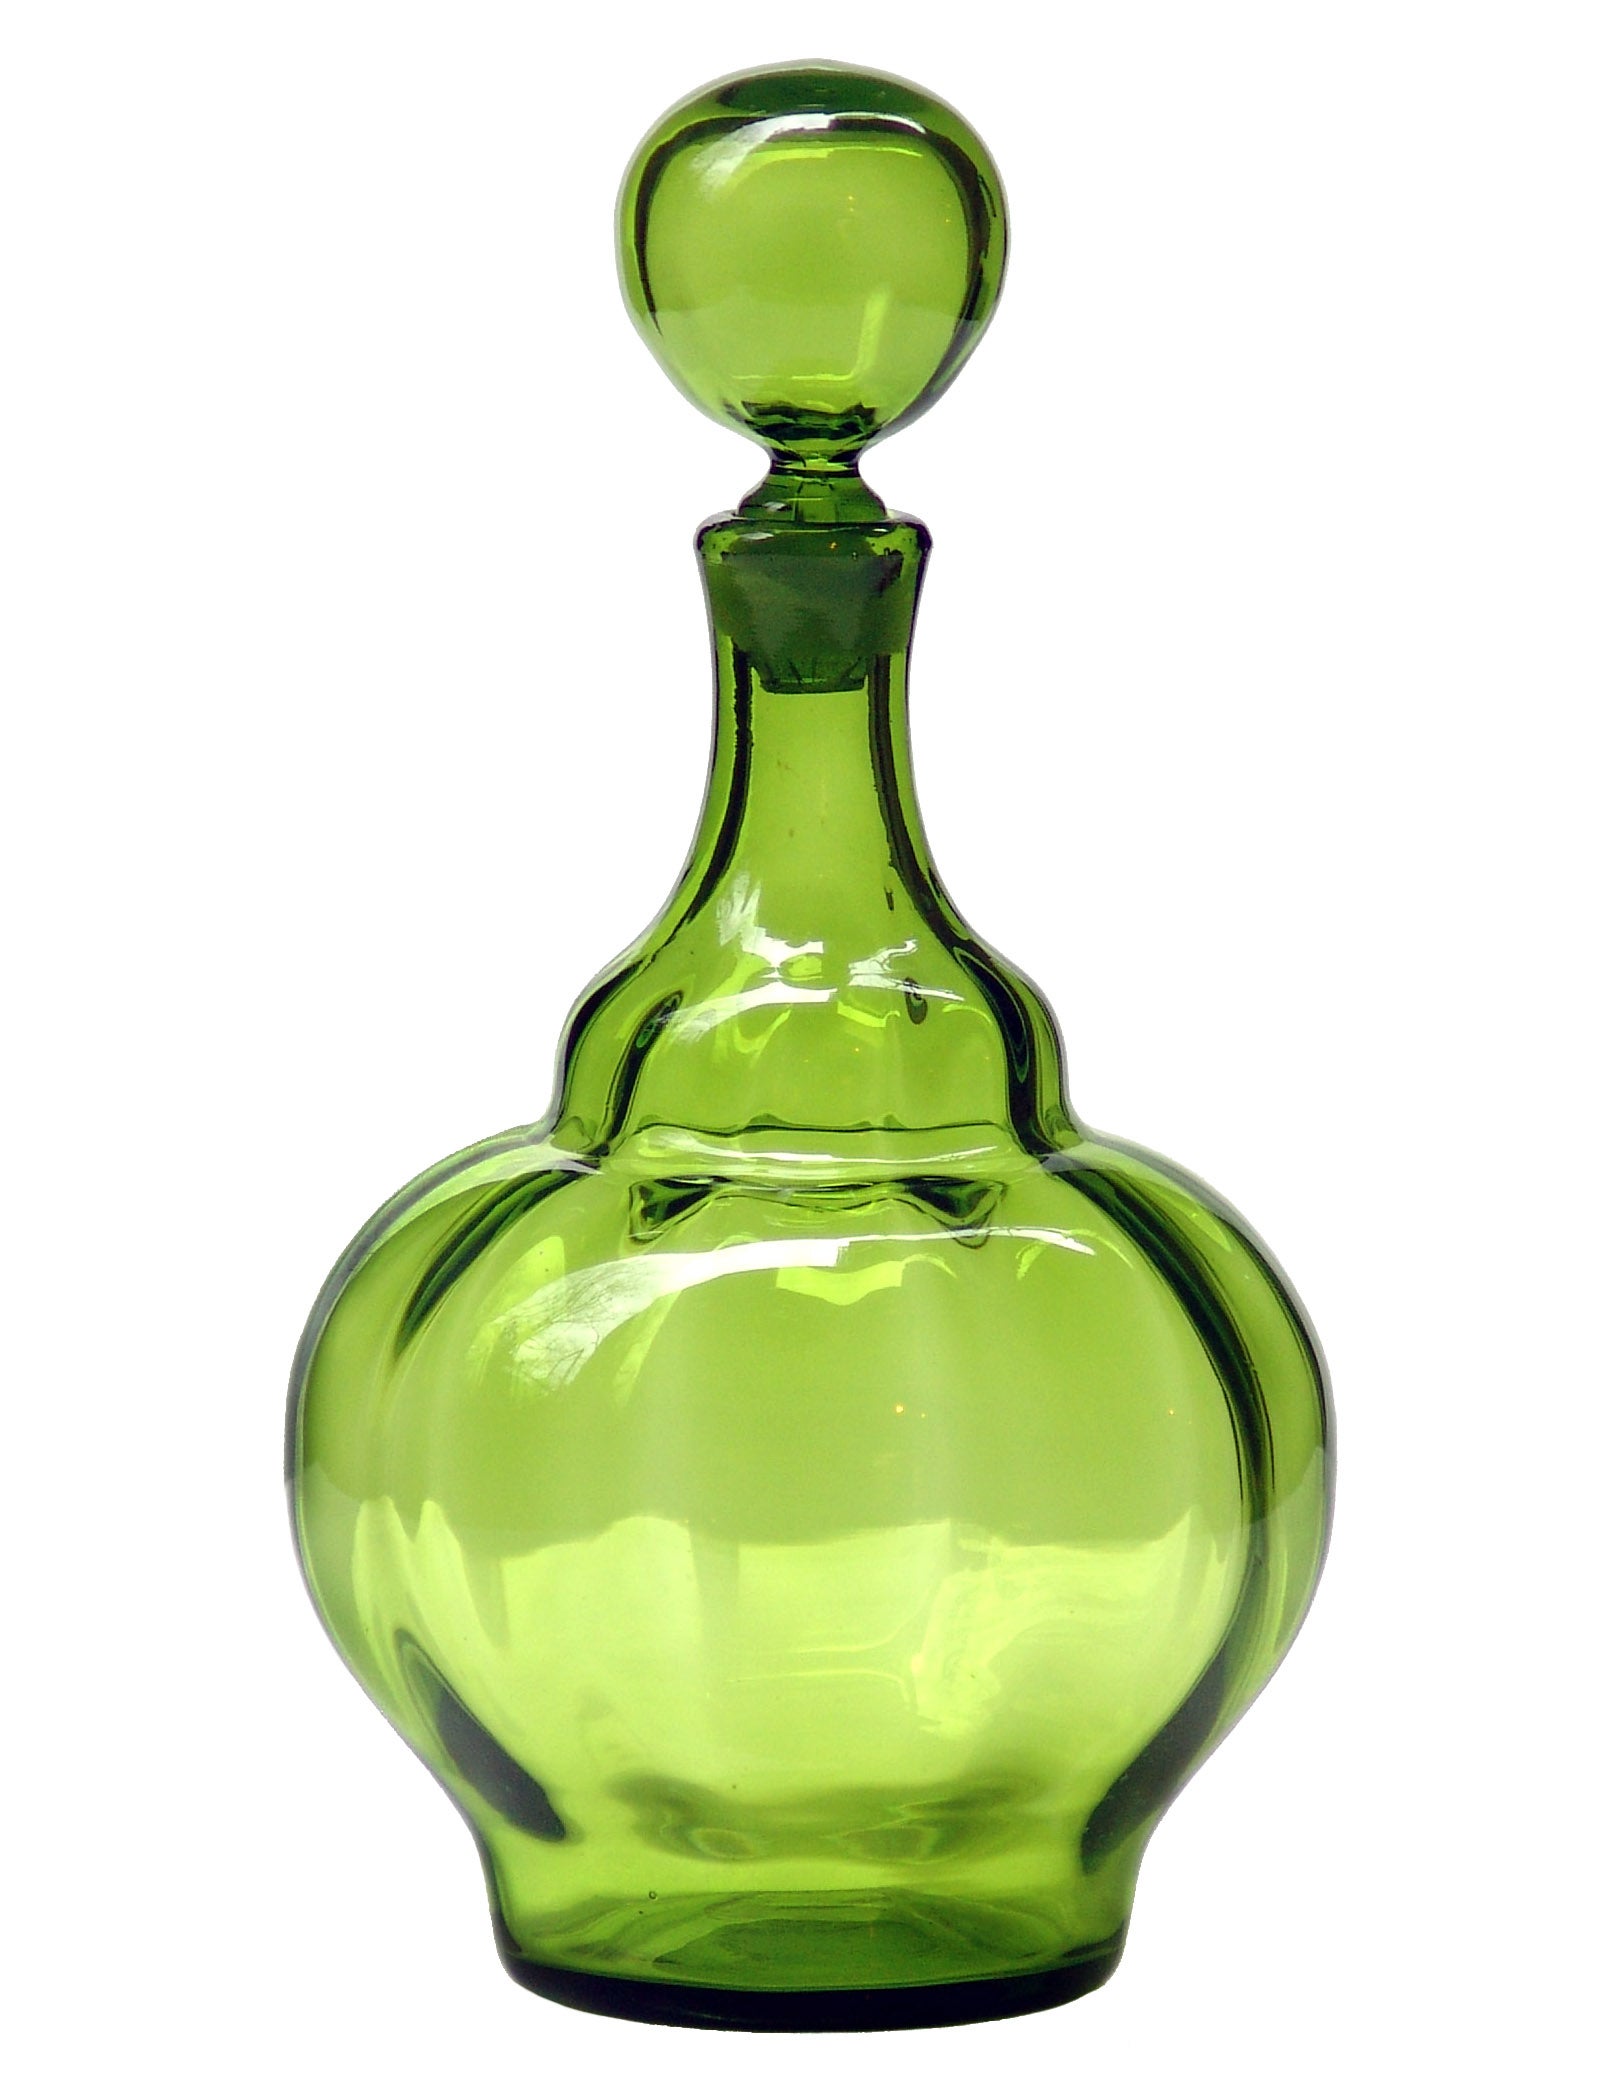 1969 Optic Rib Decanter by Joel Philip Myers for the Blenko Glass Co. For Sale